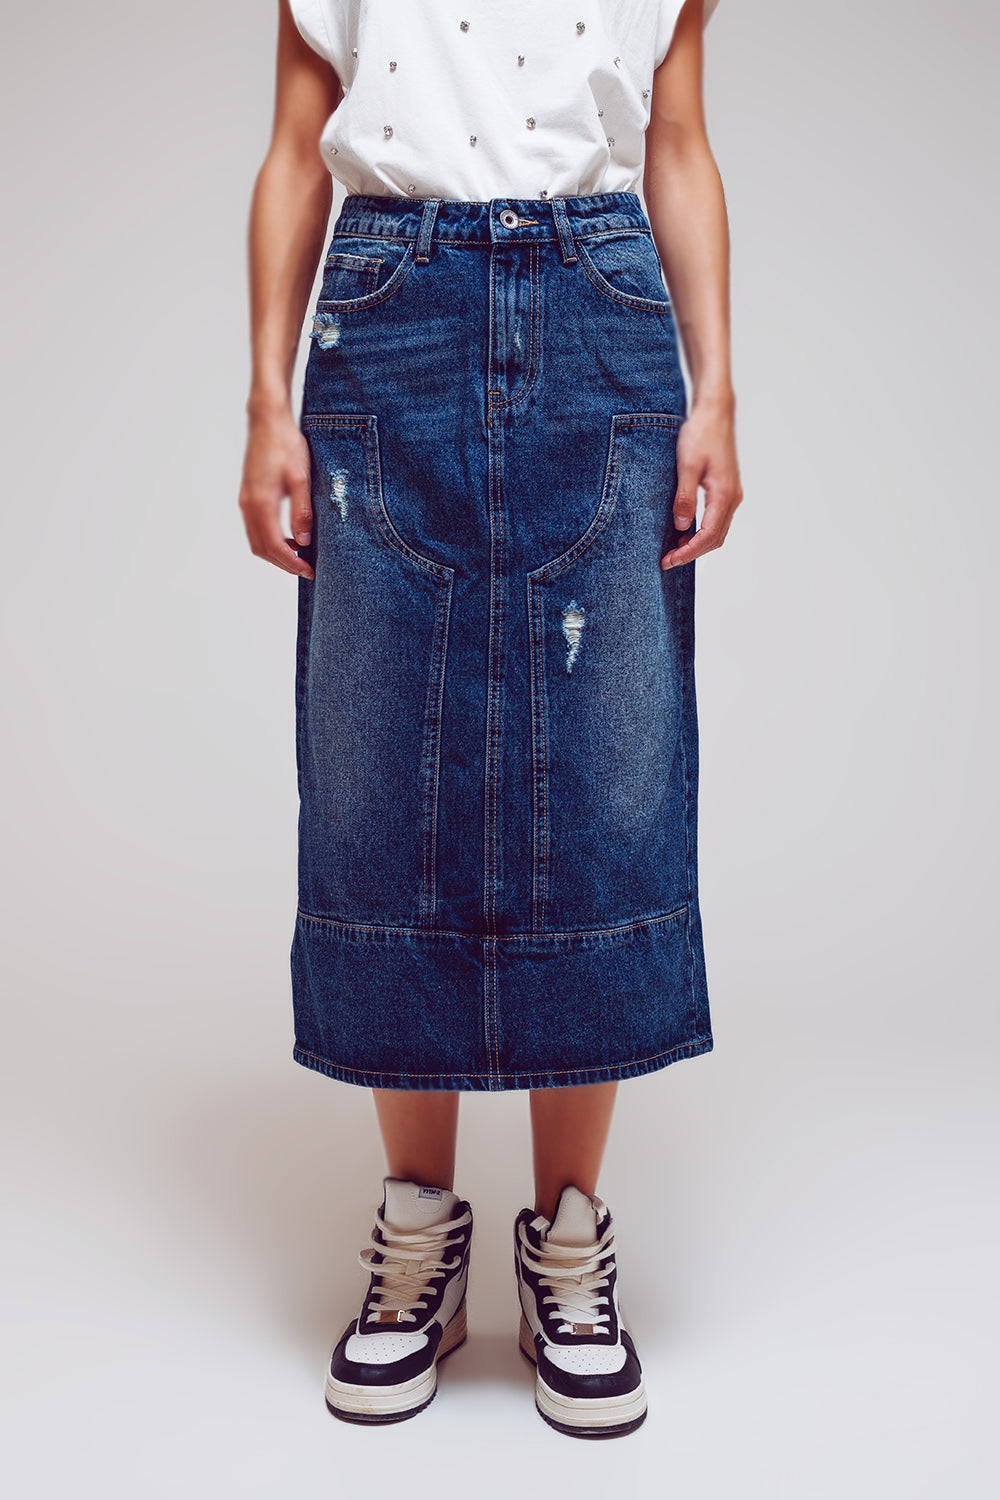 Maxi Pencil Denim Skirt With Panel Details In The Front - Szua Store